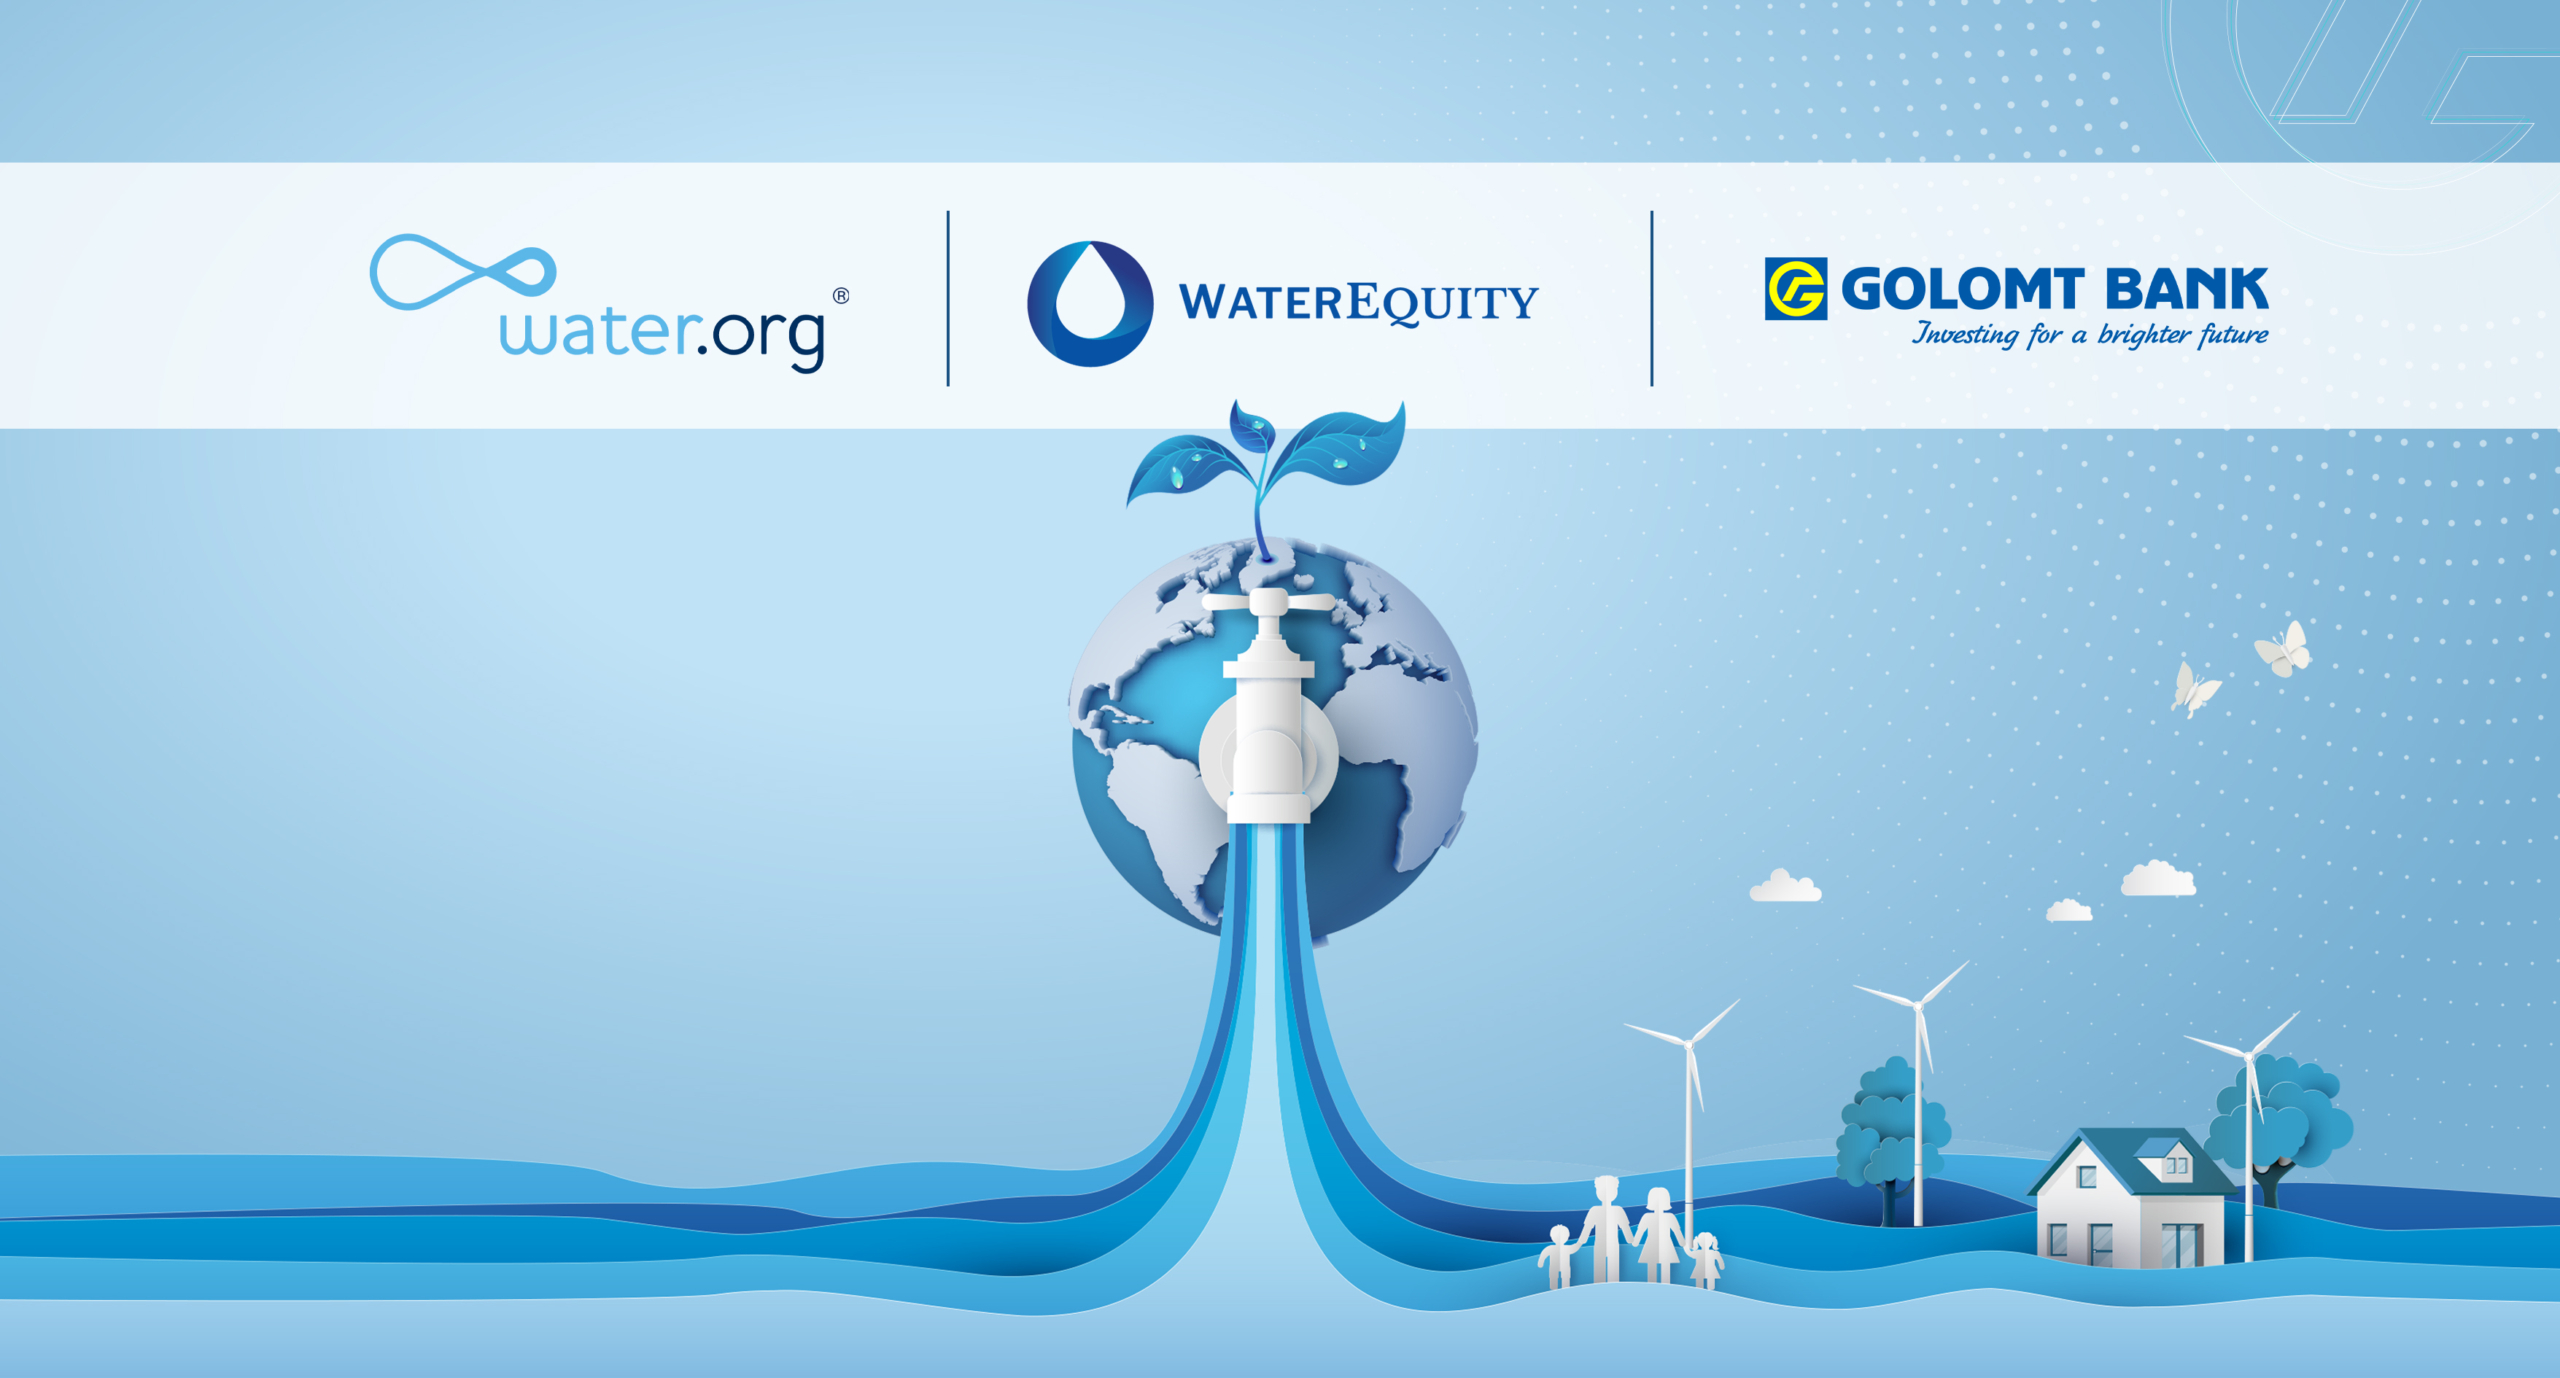 Golomt Bank supports water accessibility and sanitation projects through investment by WaterEquity